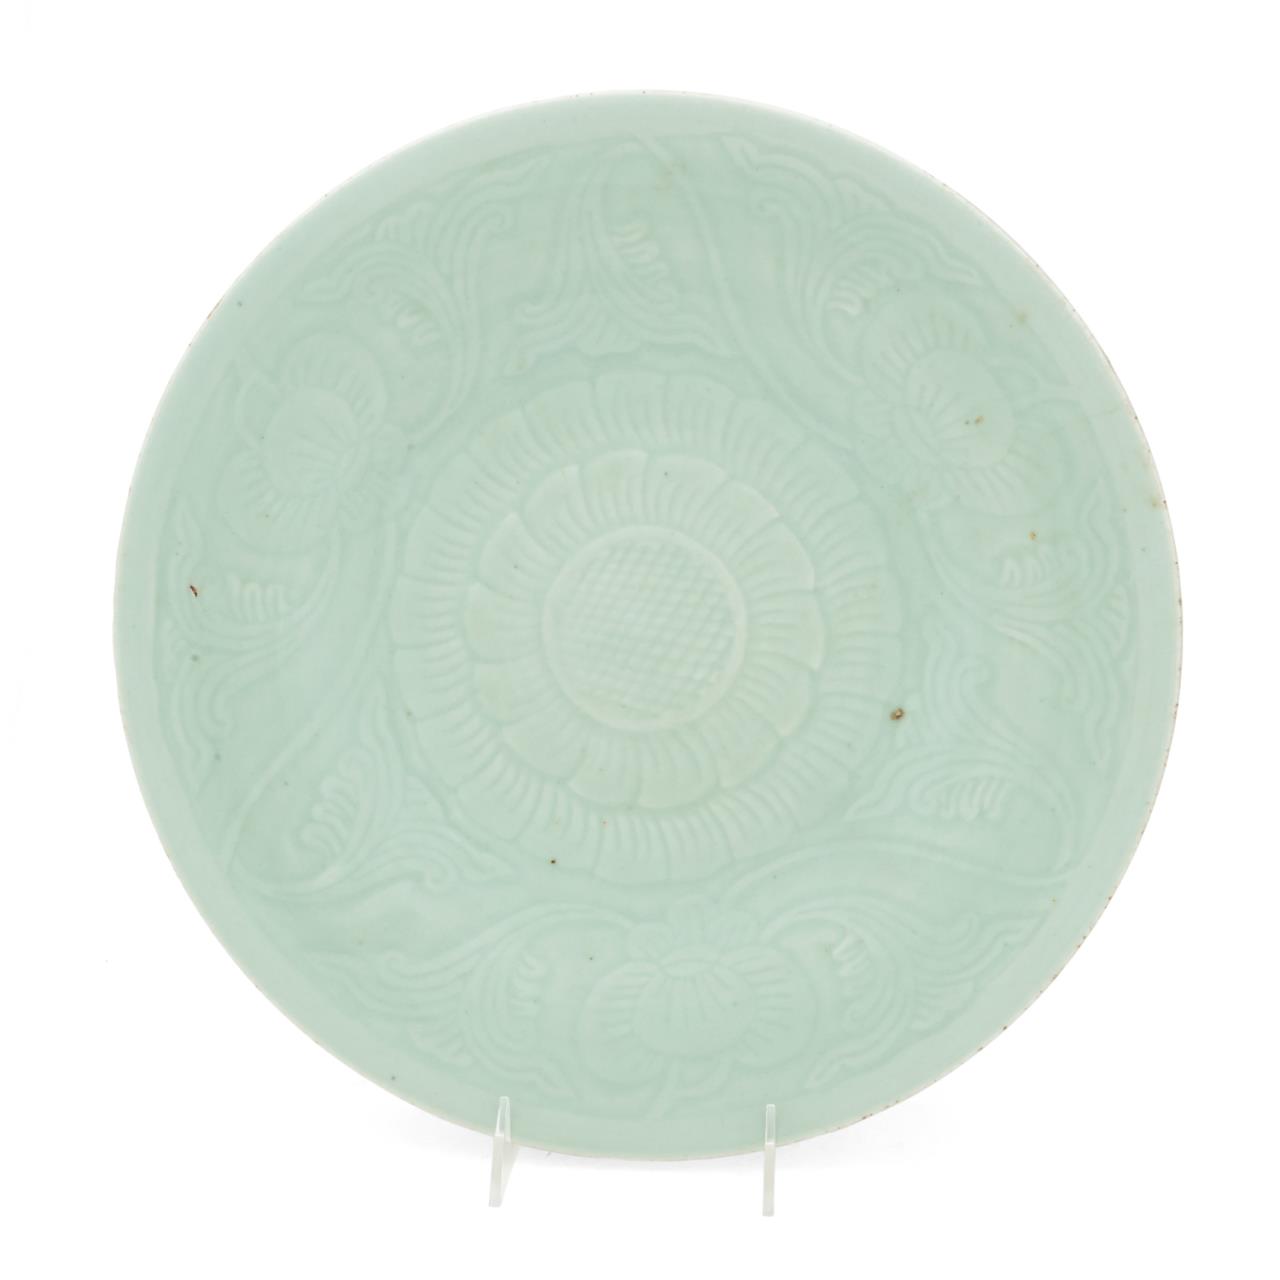 CHINESE FLORAL YUAN STYLE CELADON 2bfb47